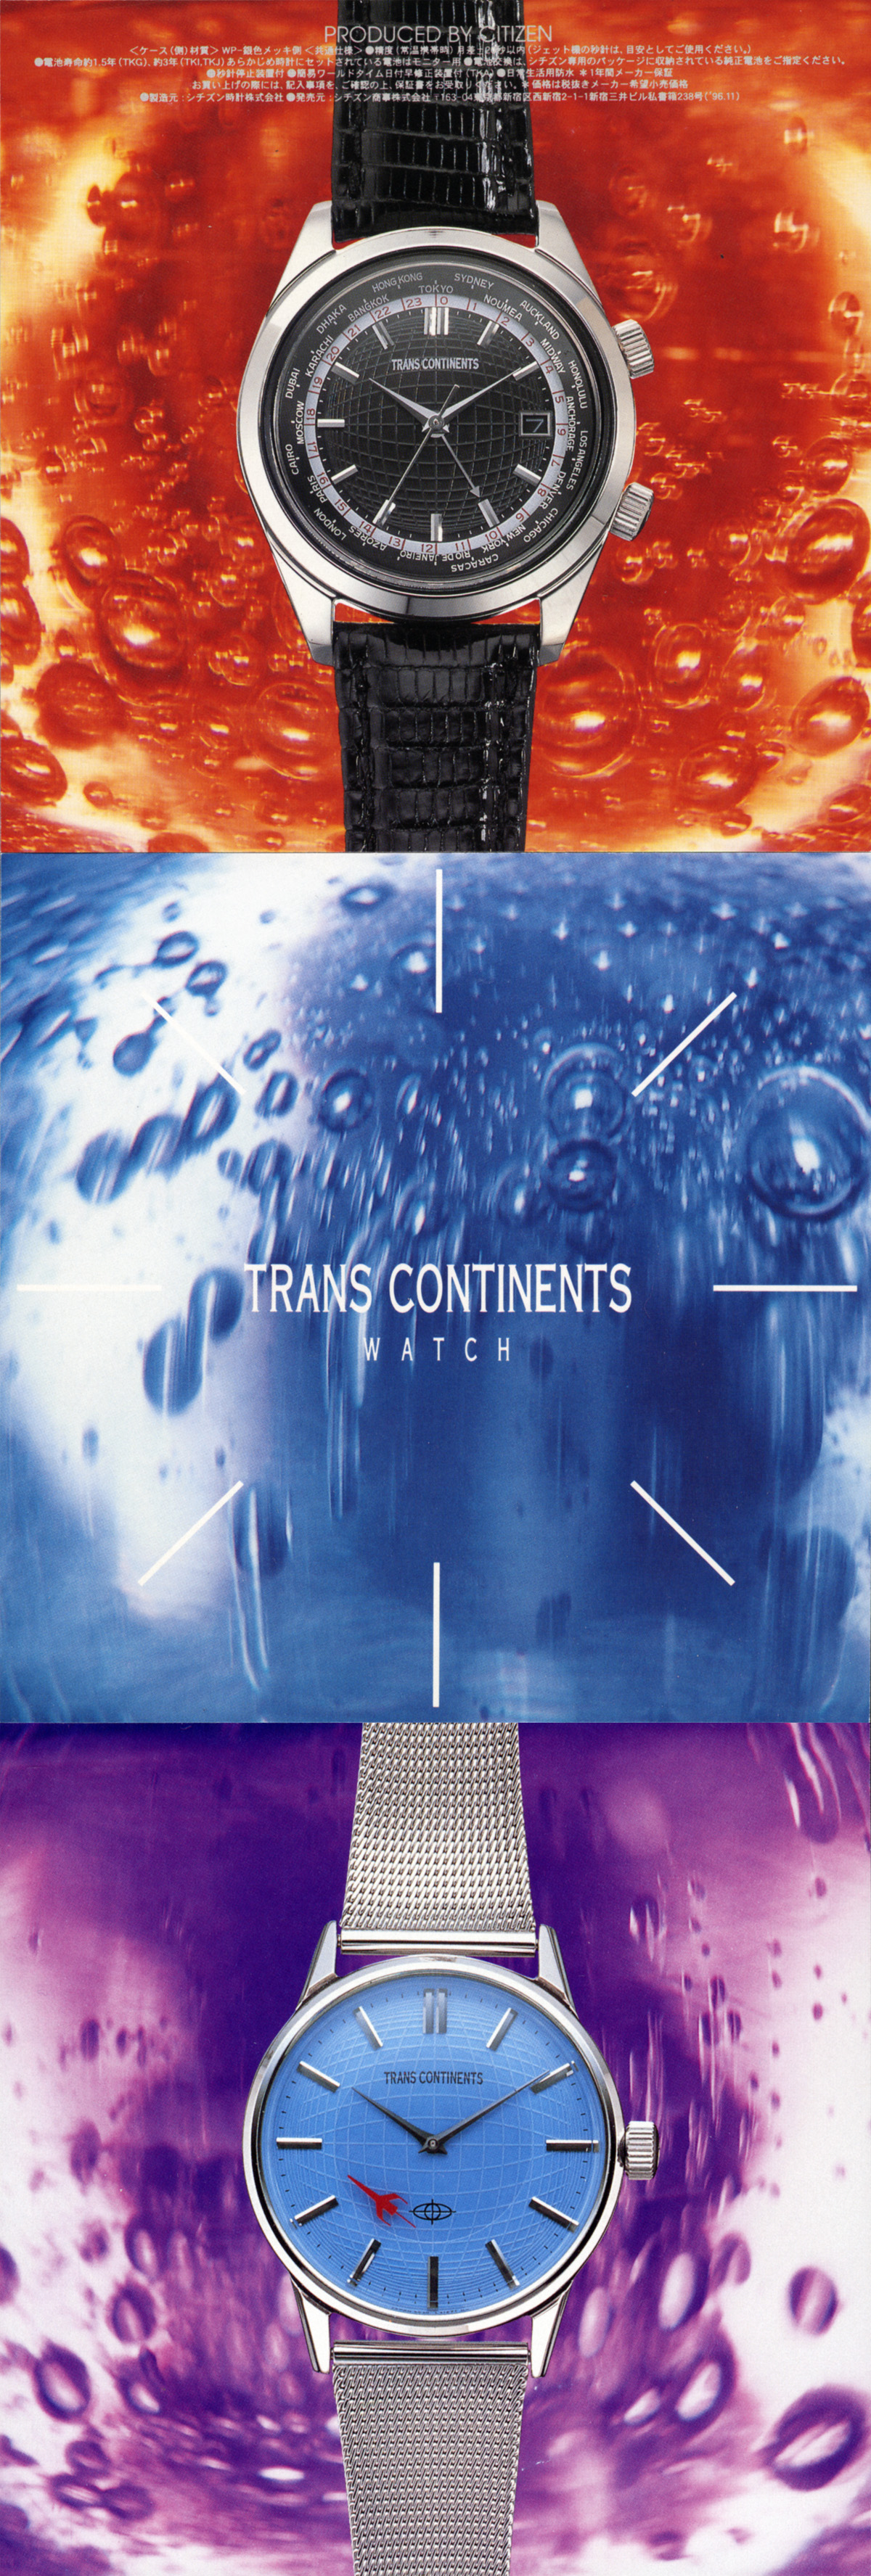 Trans Continents “Watch” AD